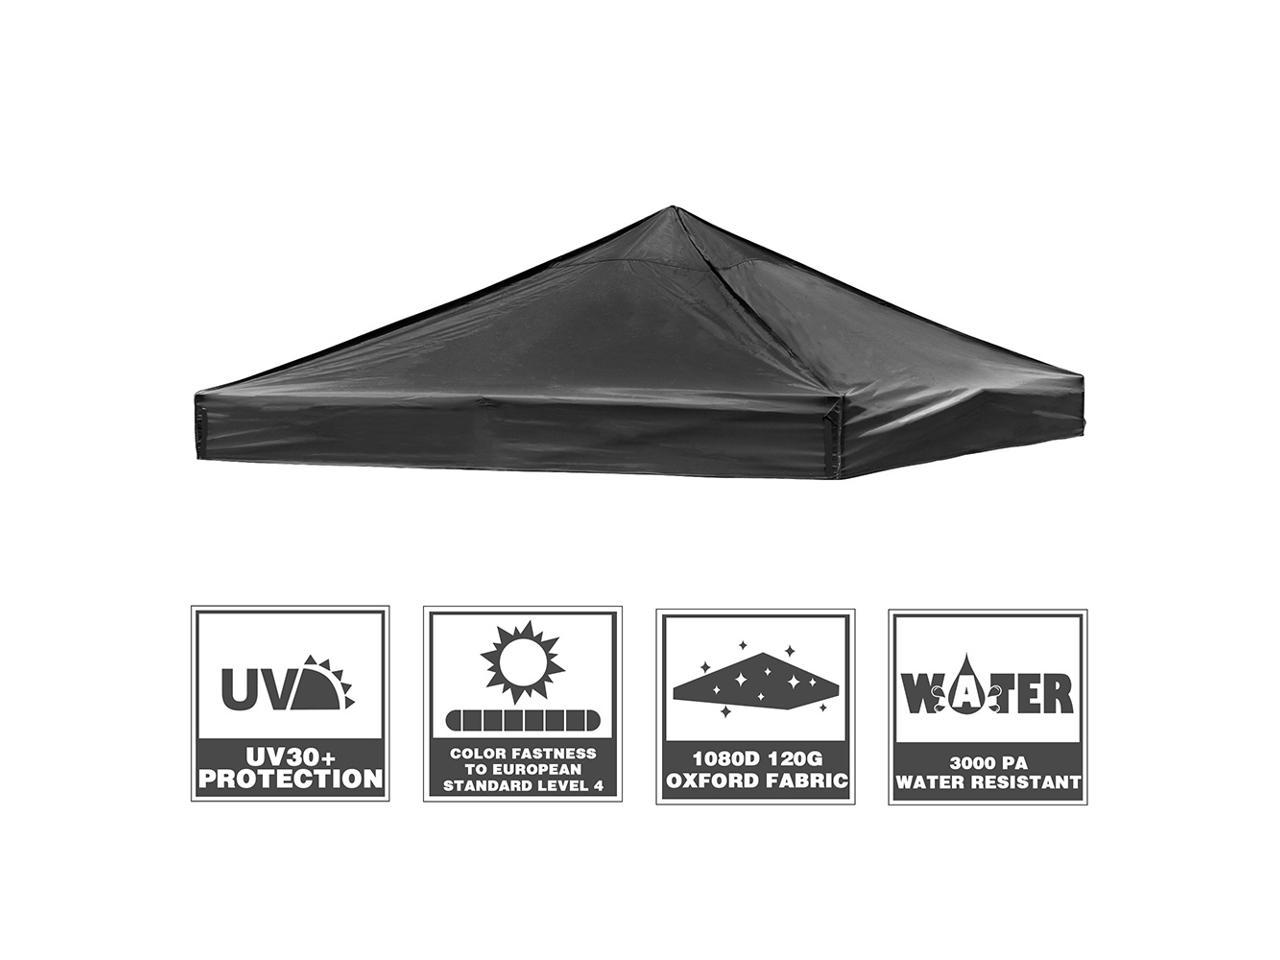 InstaHibit 10x10 Ft Pop up Canopy Top with 4 Sand Weight Bags Outdoor Camping 